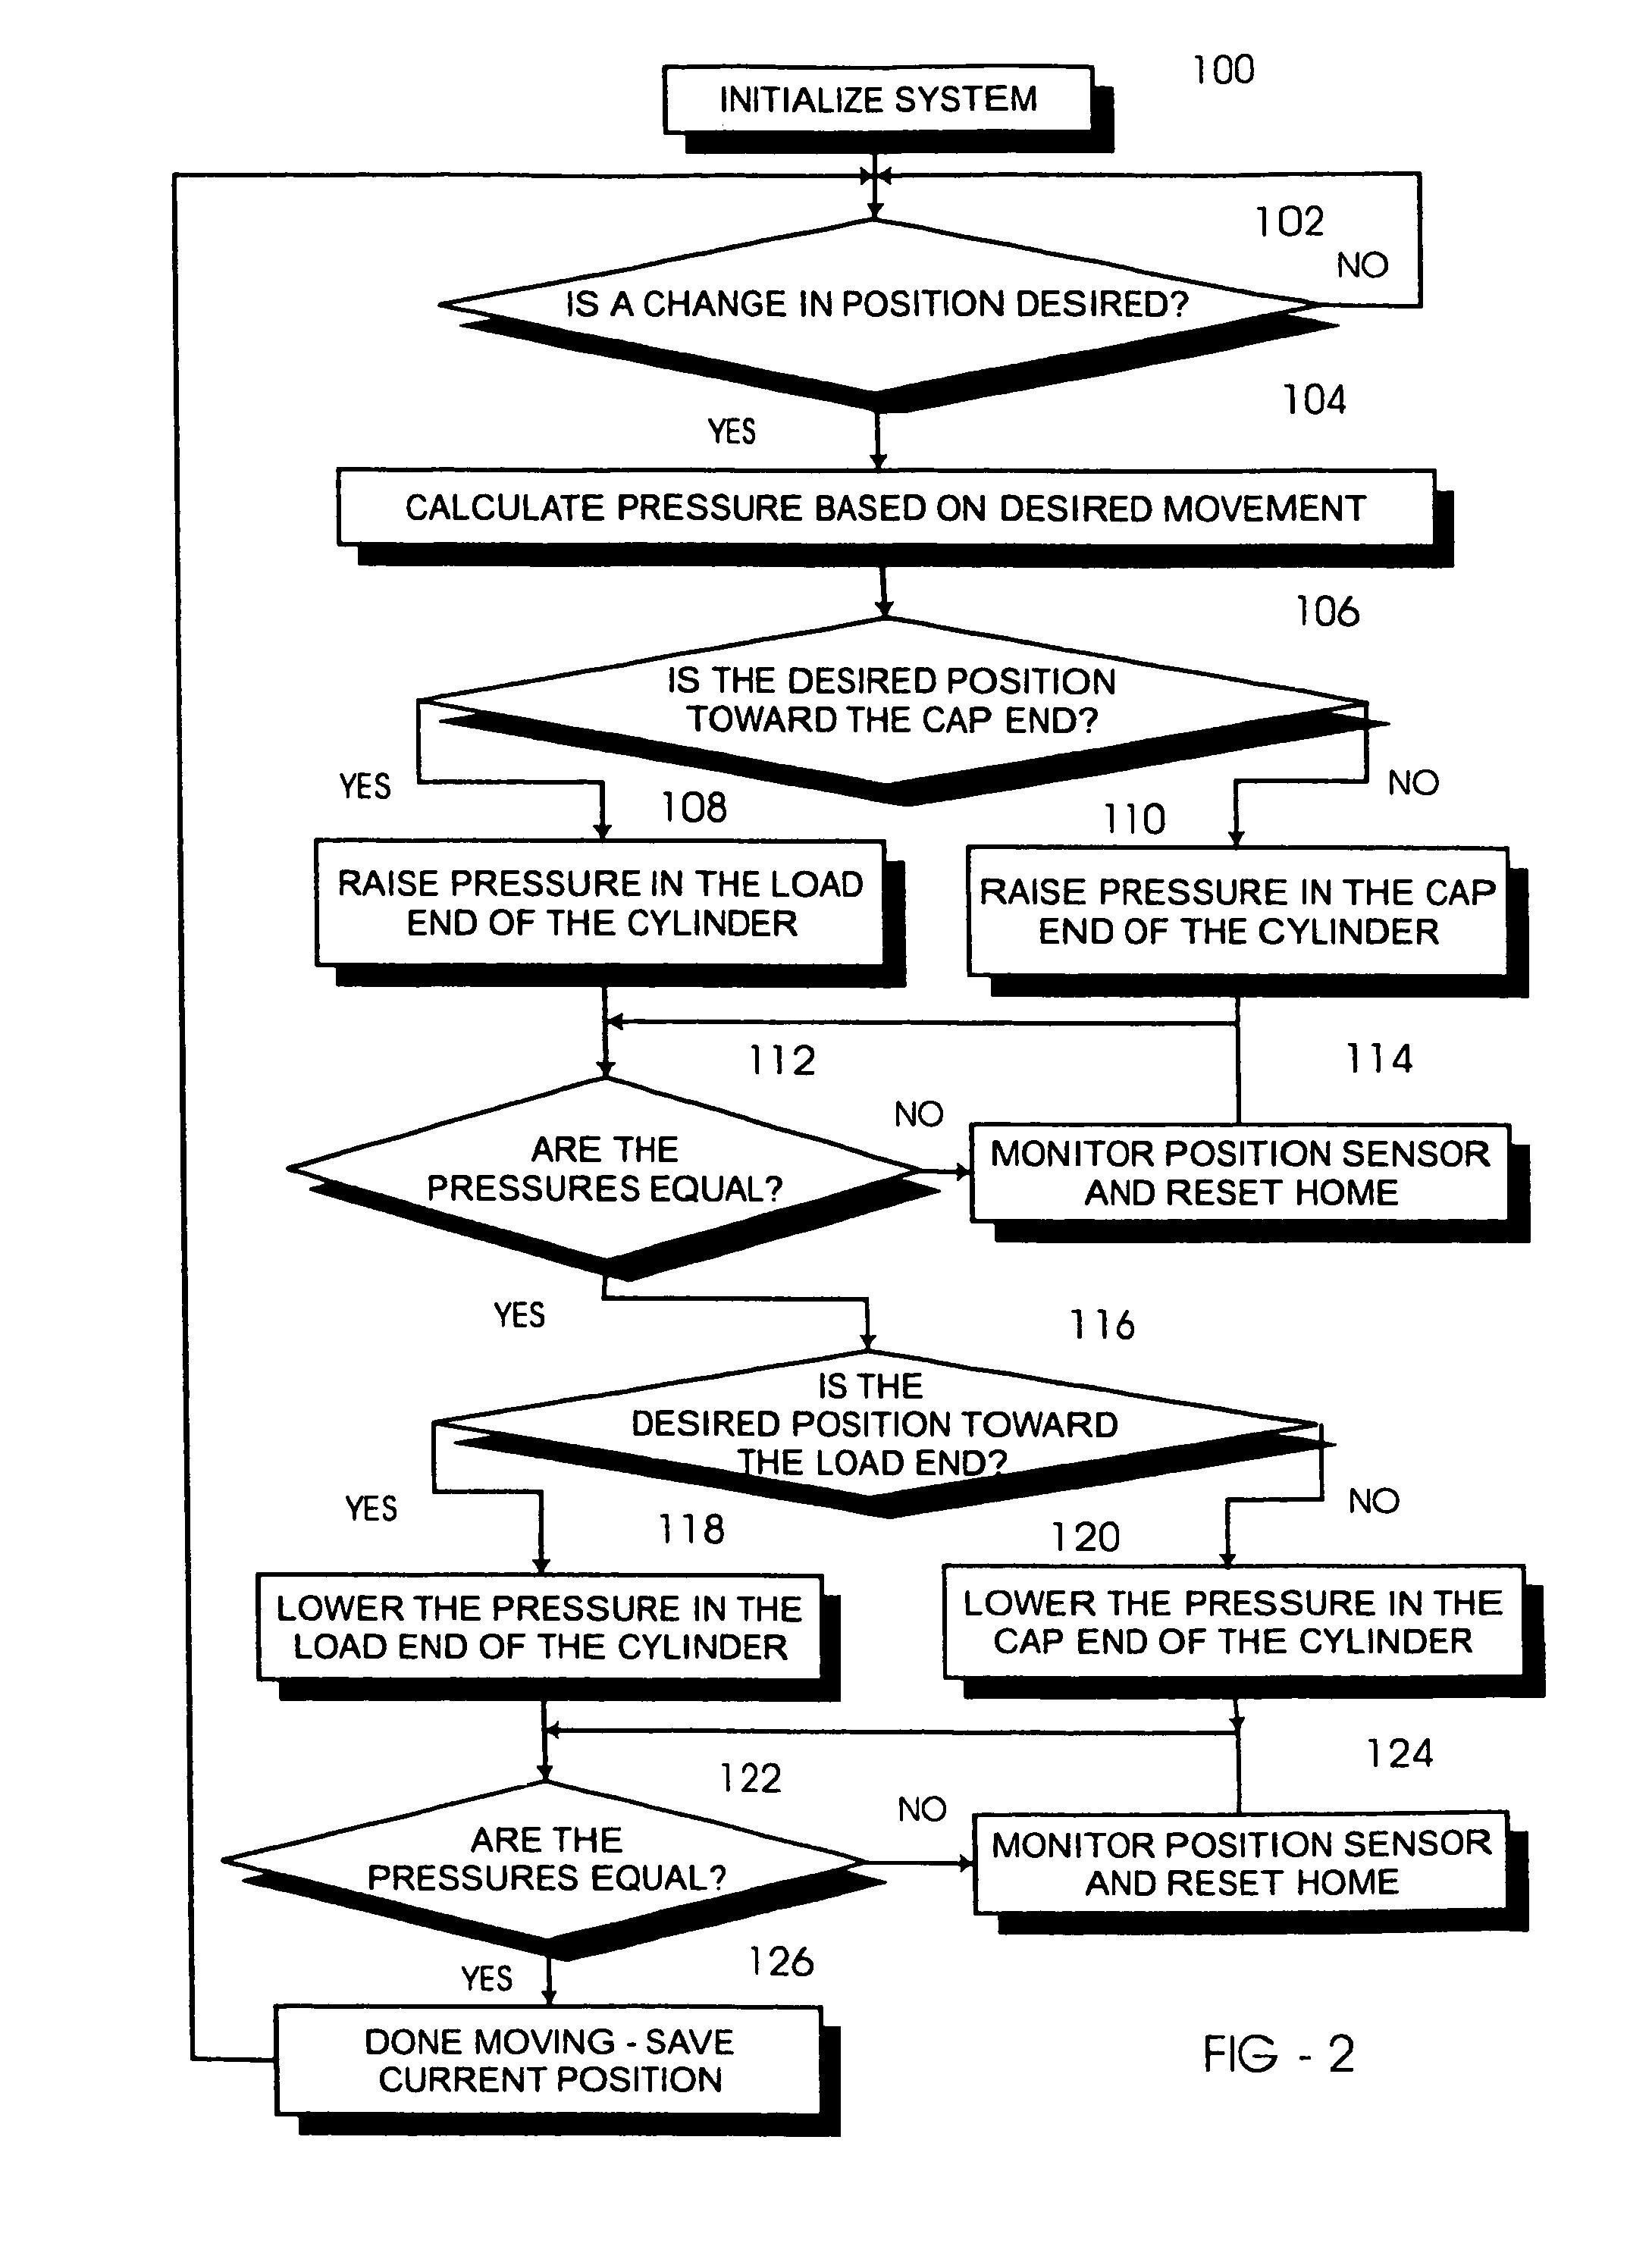 Multi-valve fluid operated cylinder positioning system